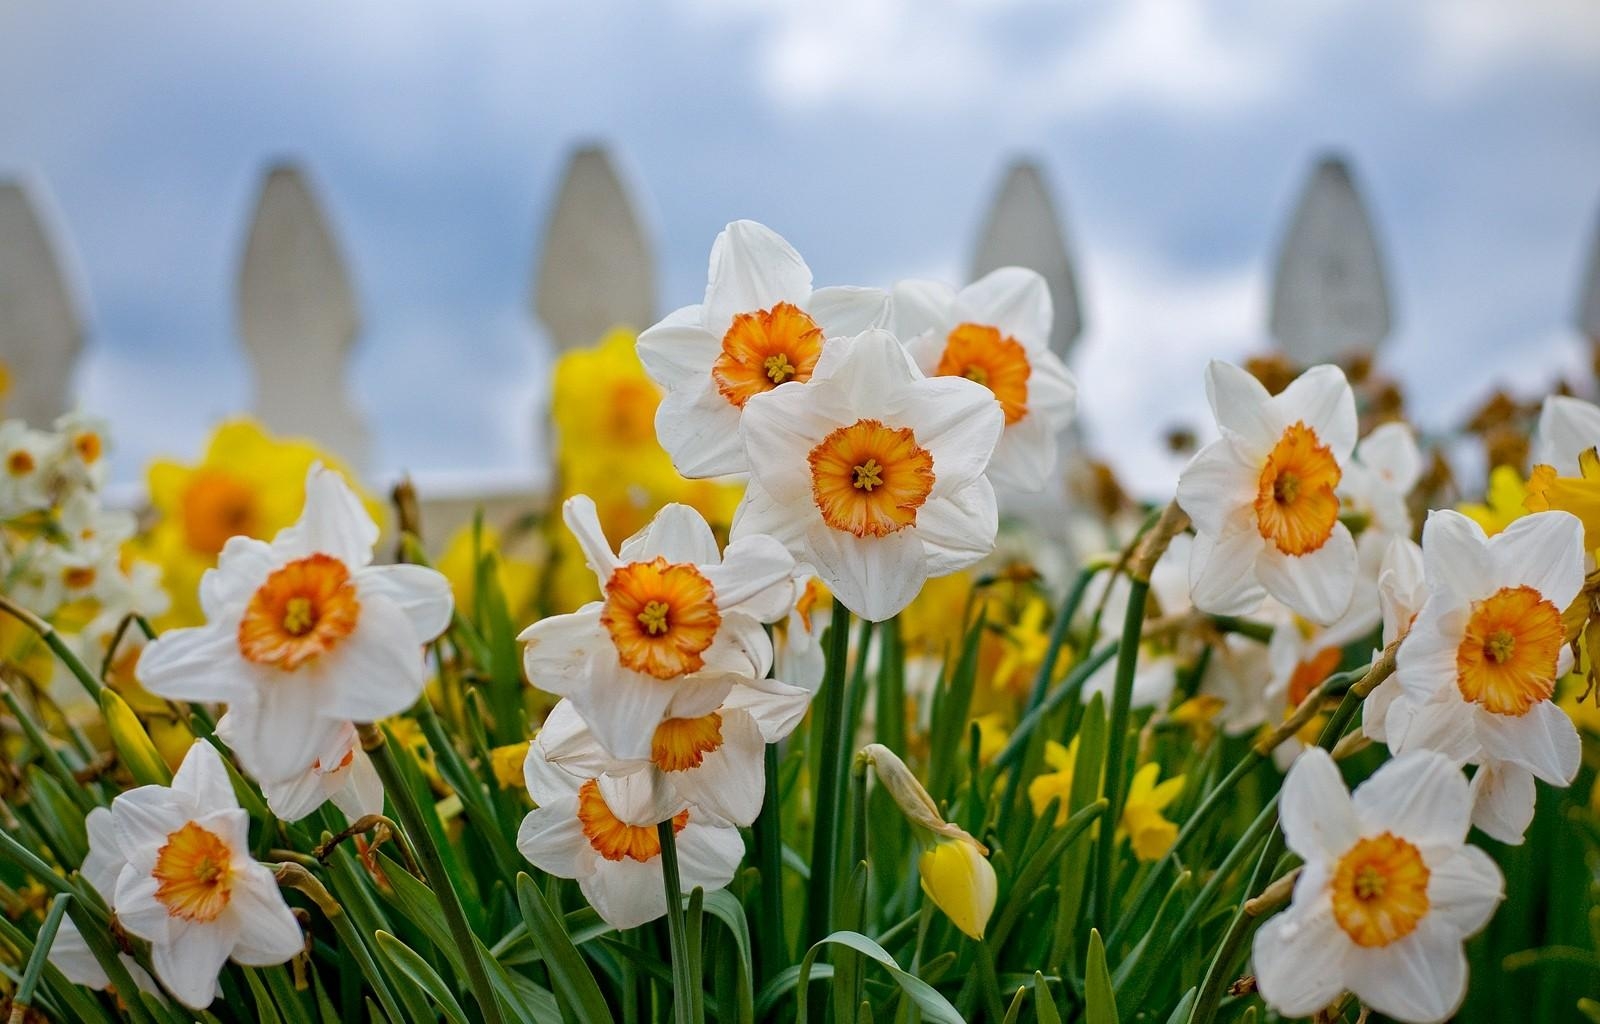 flowers, narcissussi, close up, flower bed, flowerbed, fence High Definition image